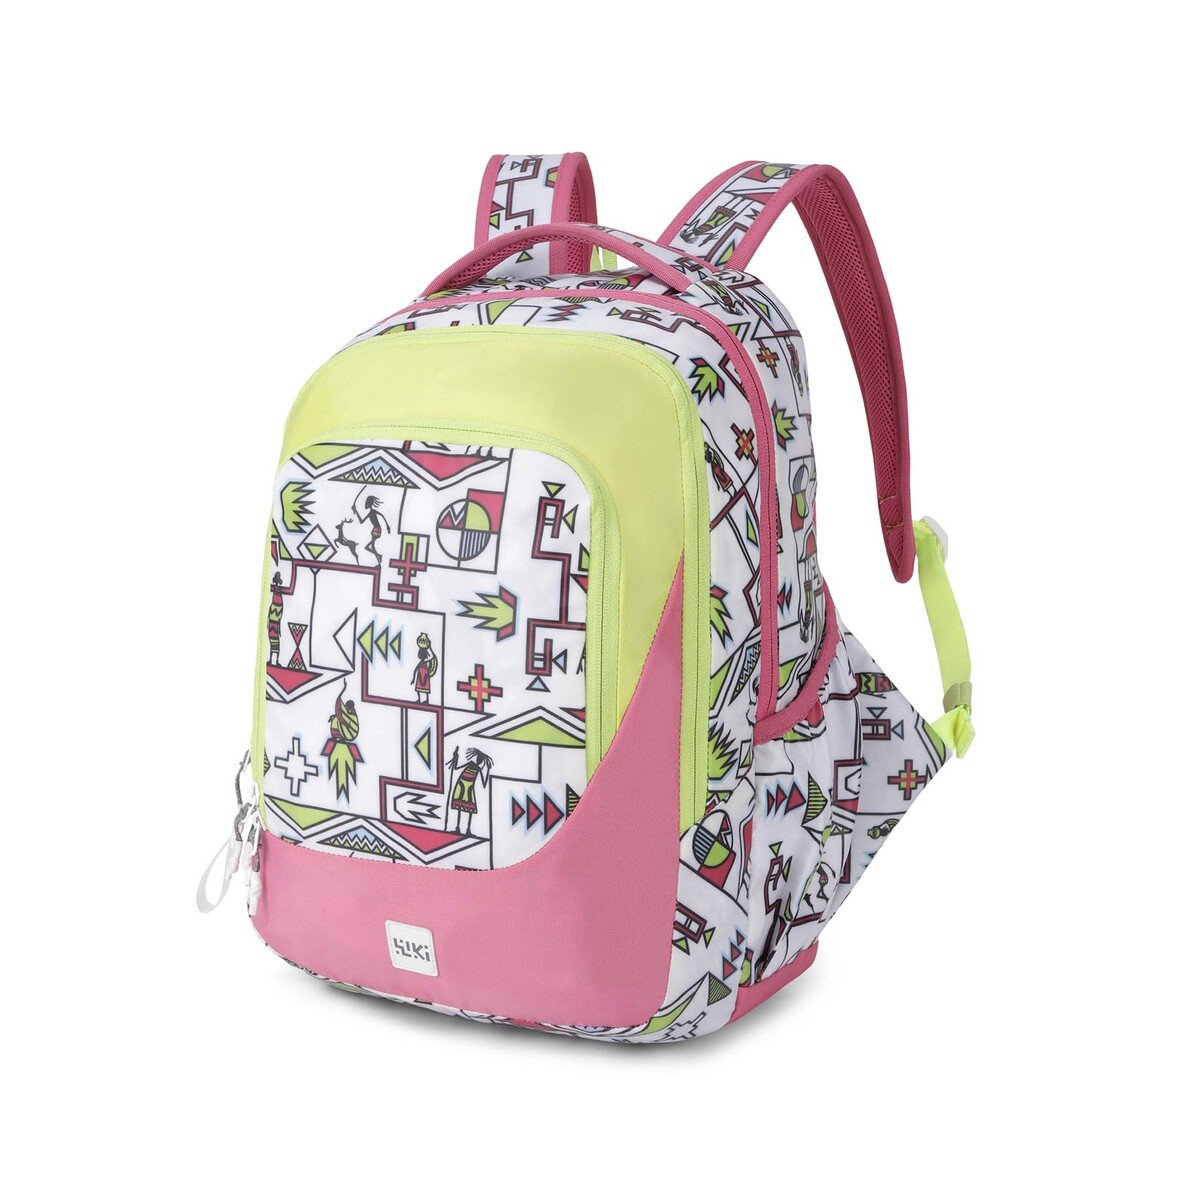 Wildcraft School Backpack Squad2 14inch White